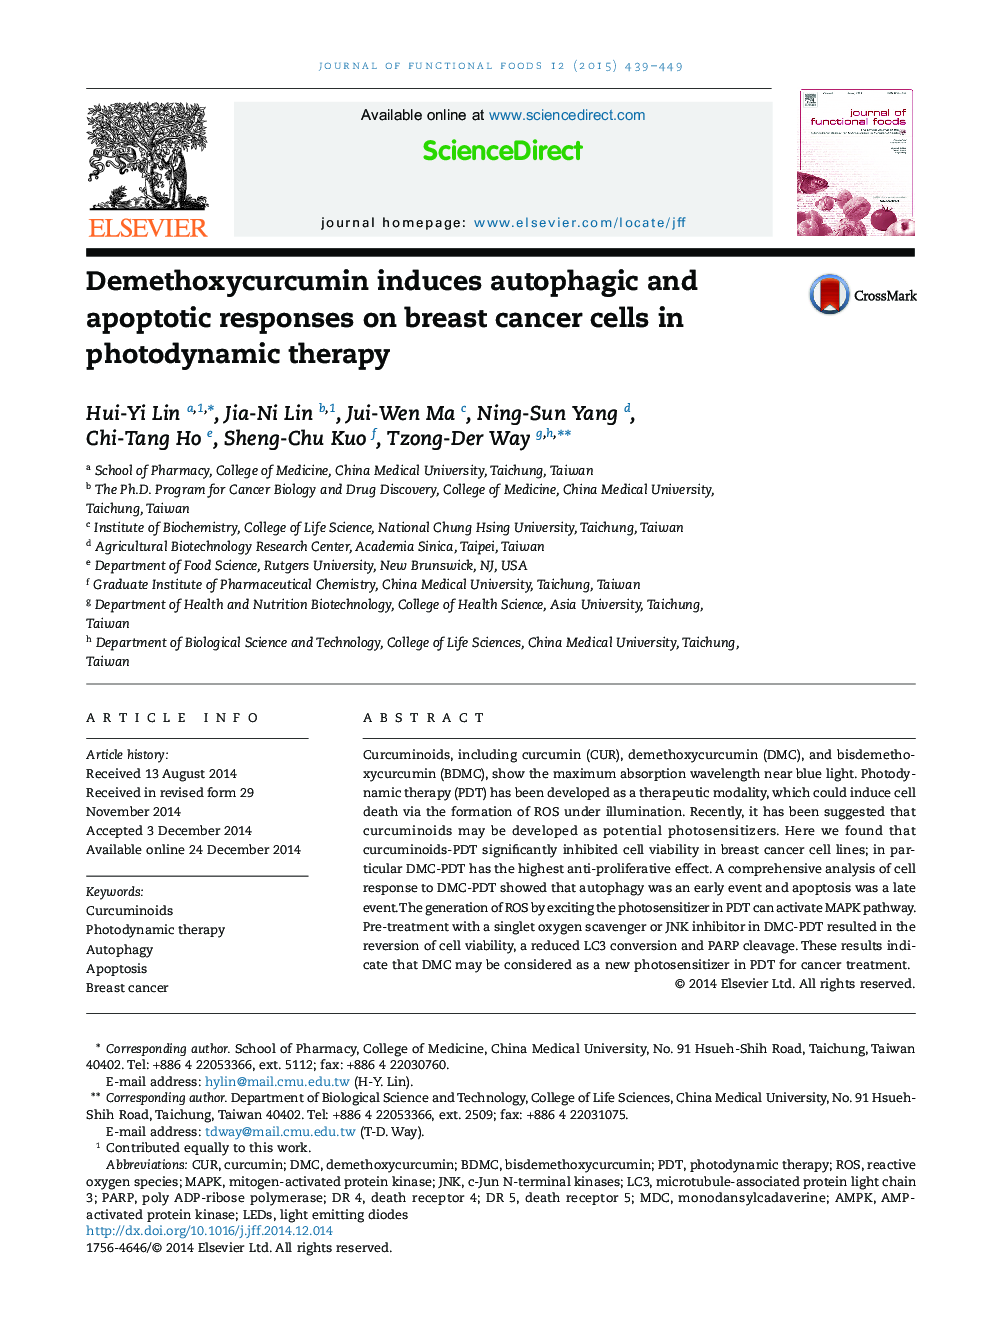 Demethoxycurcumin induces autophagic and apoptotic responses on breast cancer cells in photodynamic therapy